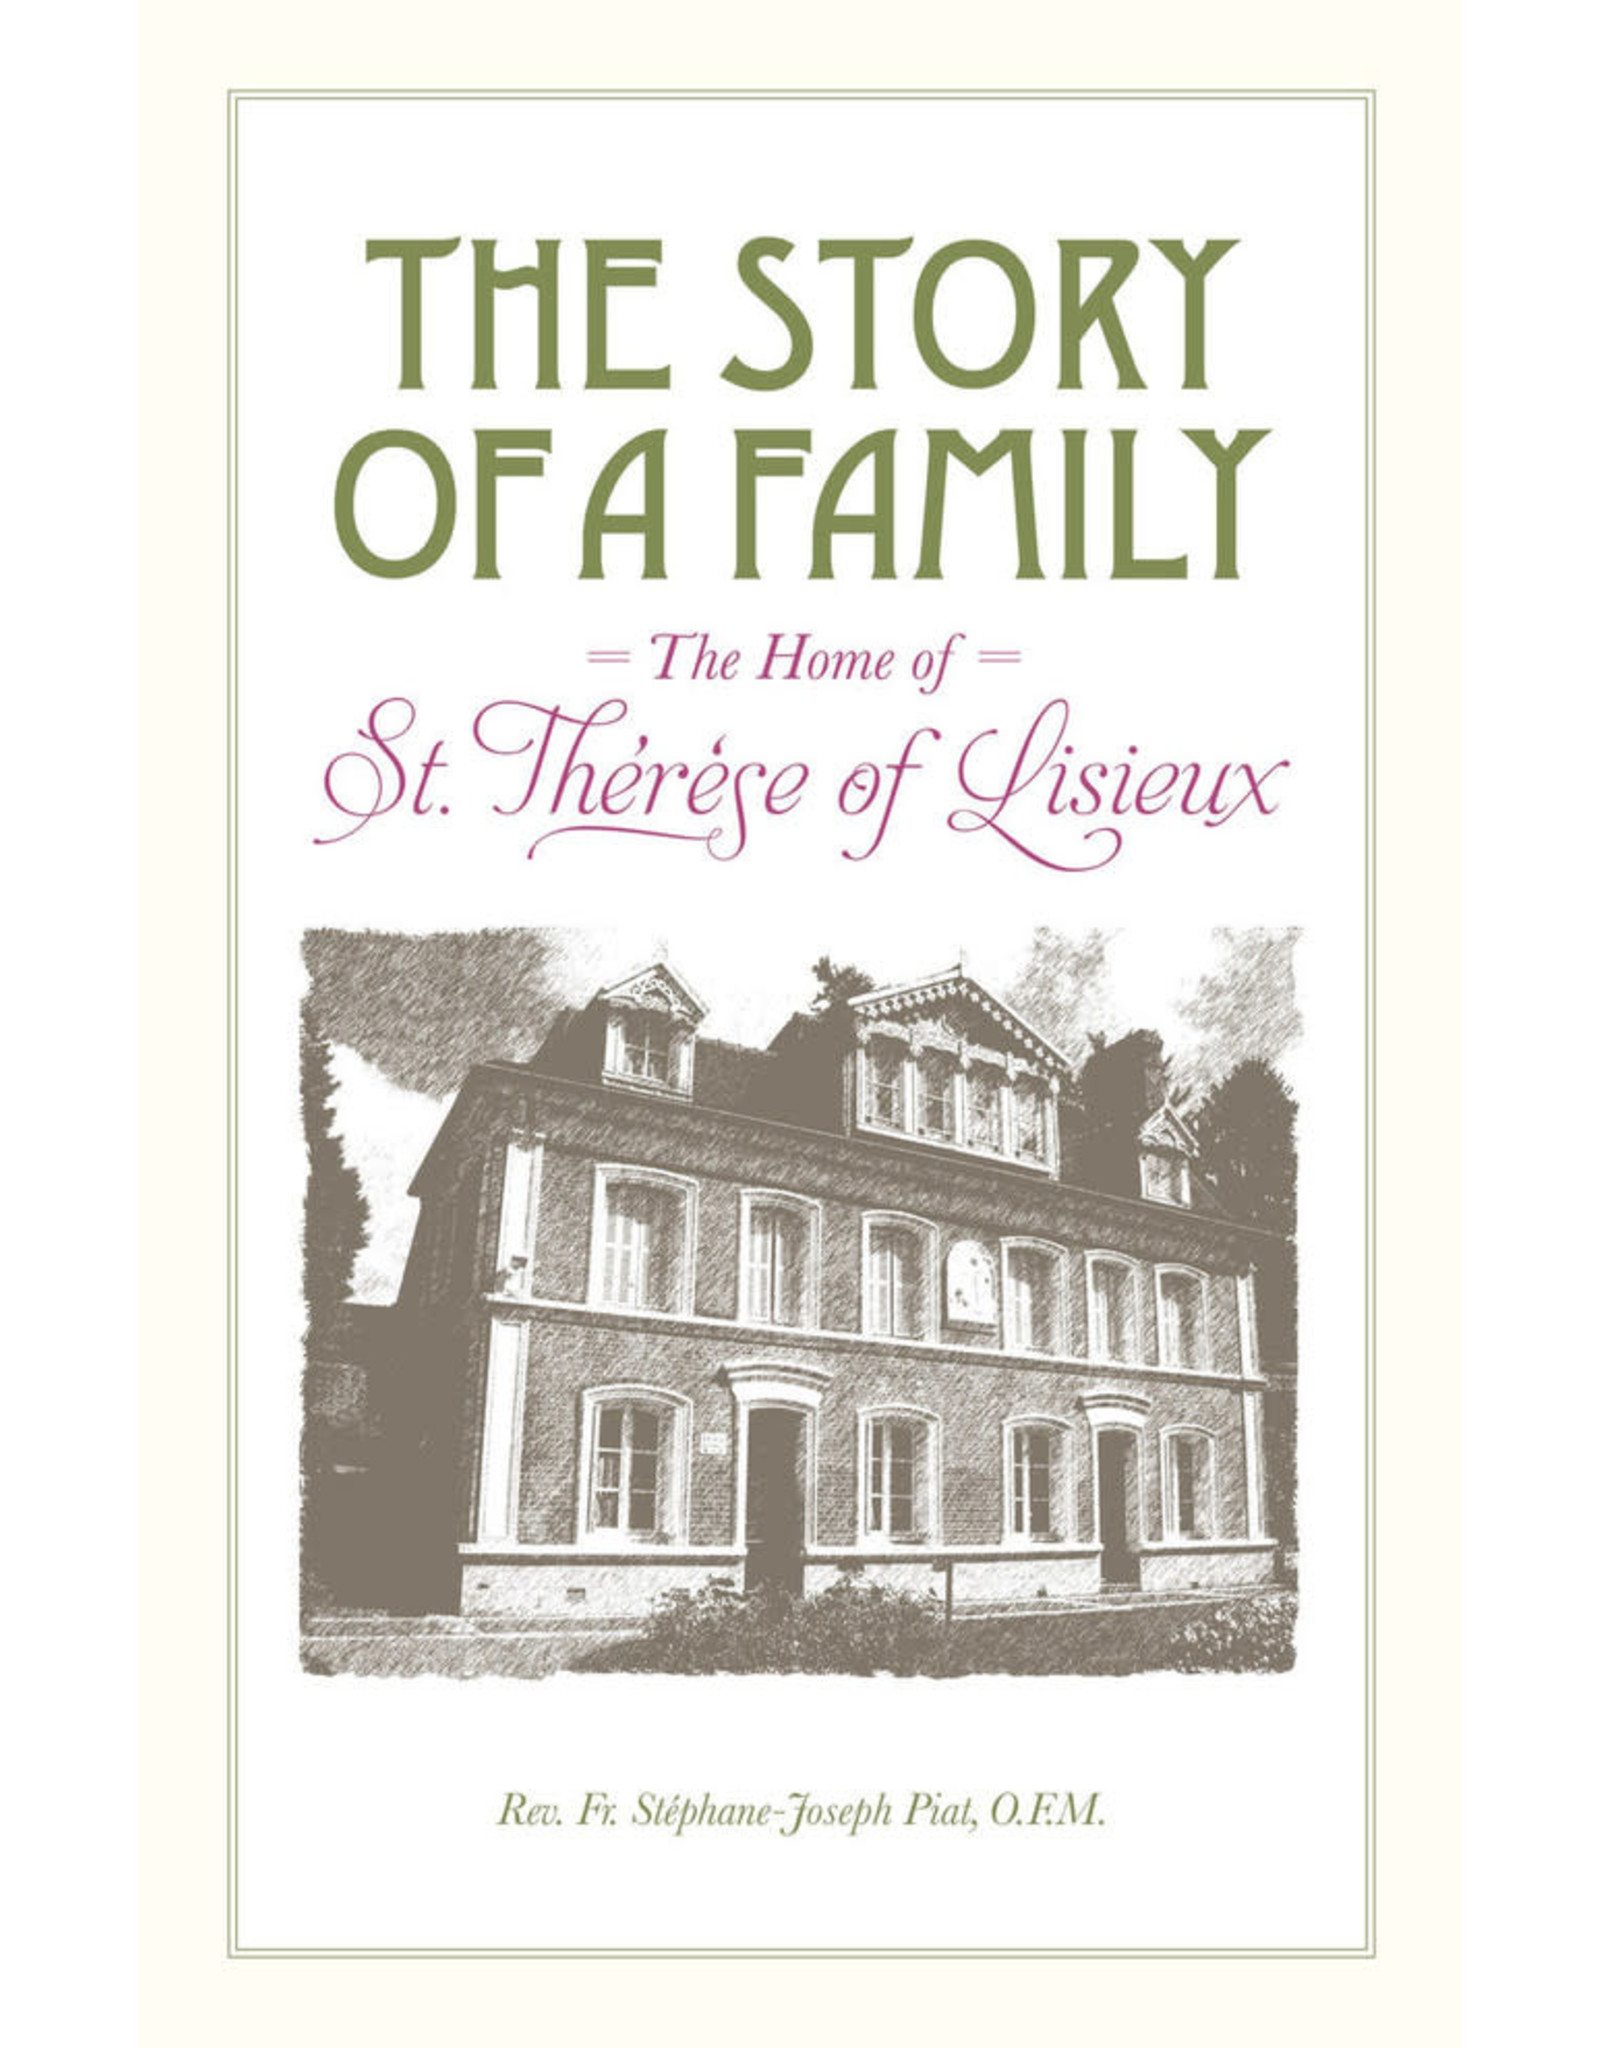 Tan Story of a Family: The Home of St. Therese of Lisieux